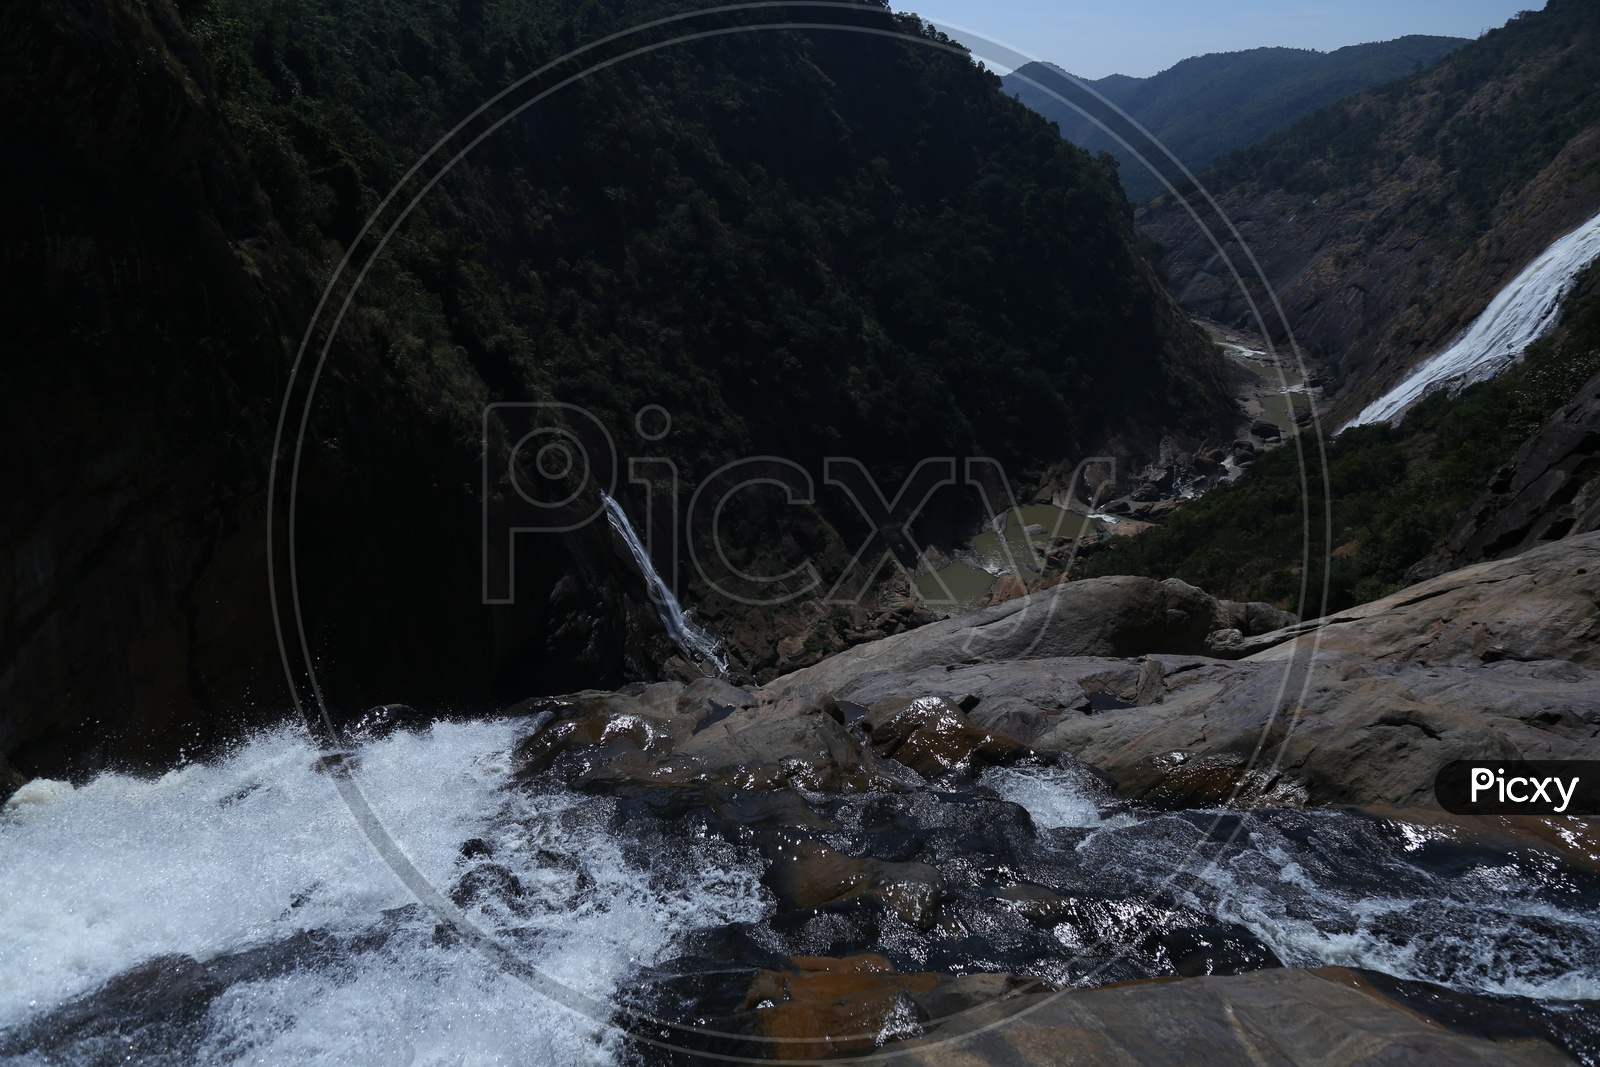 A Beautiful View Of Duduma Water Falls With Water Streams  Or Currents Flowing over Rocks And Valleys